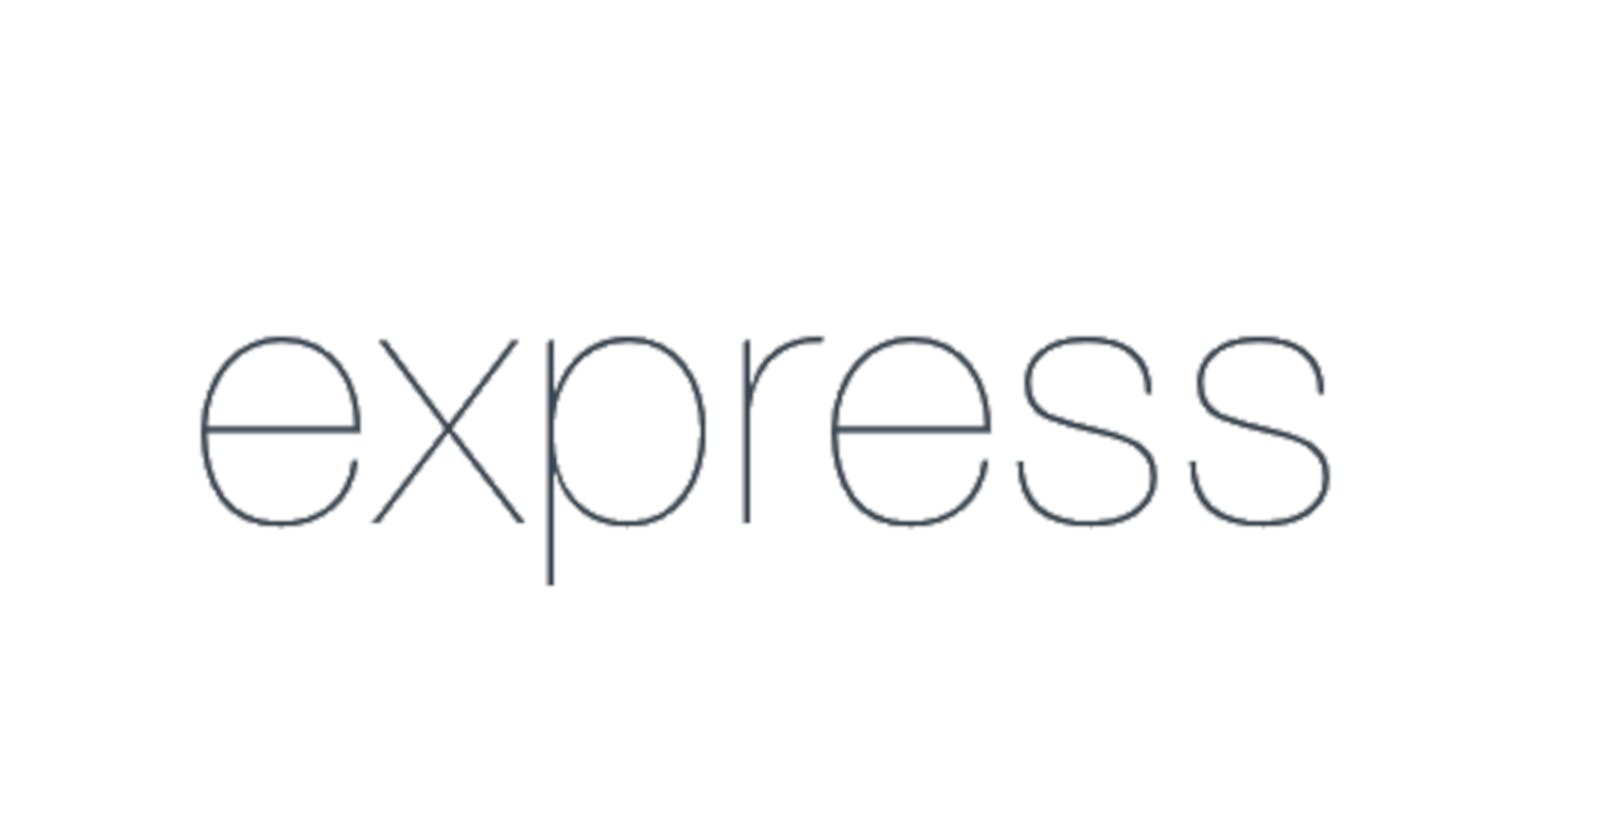 How To Send Data From A Form Using Express?